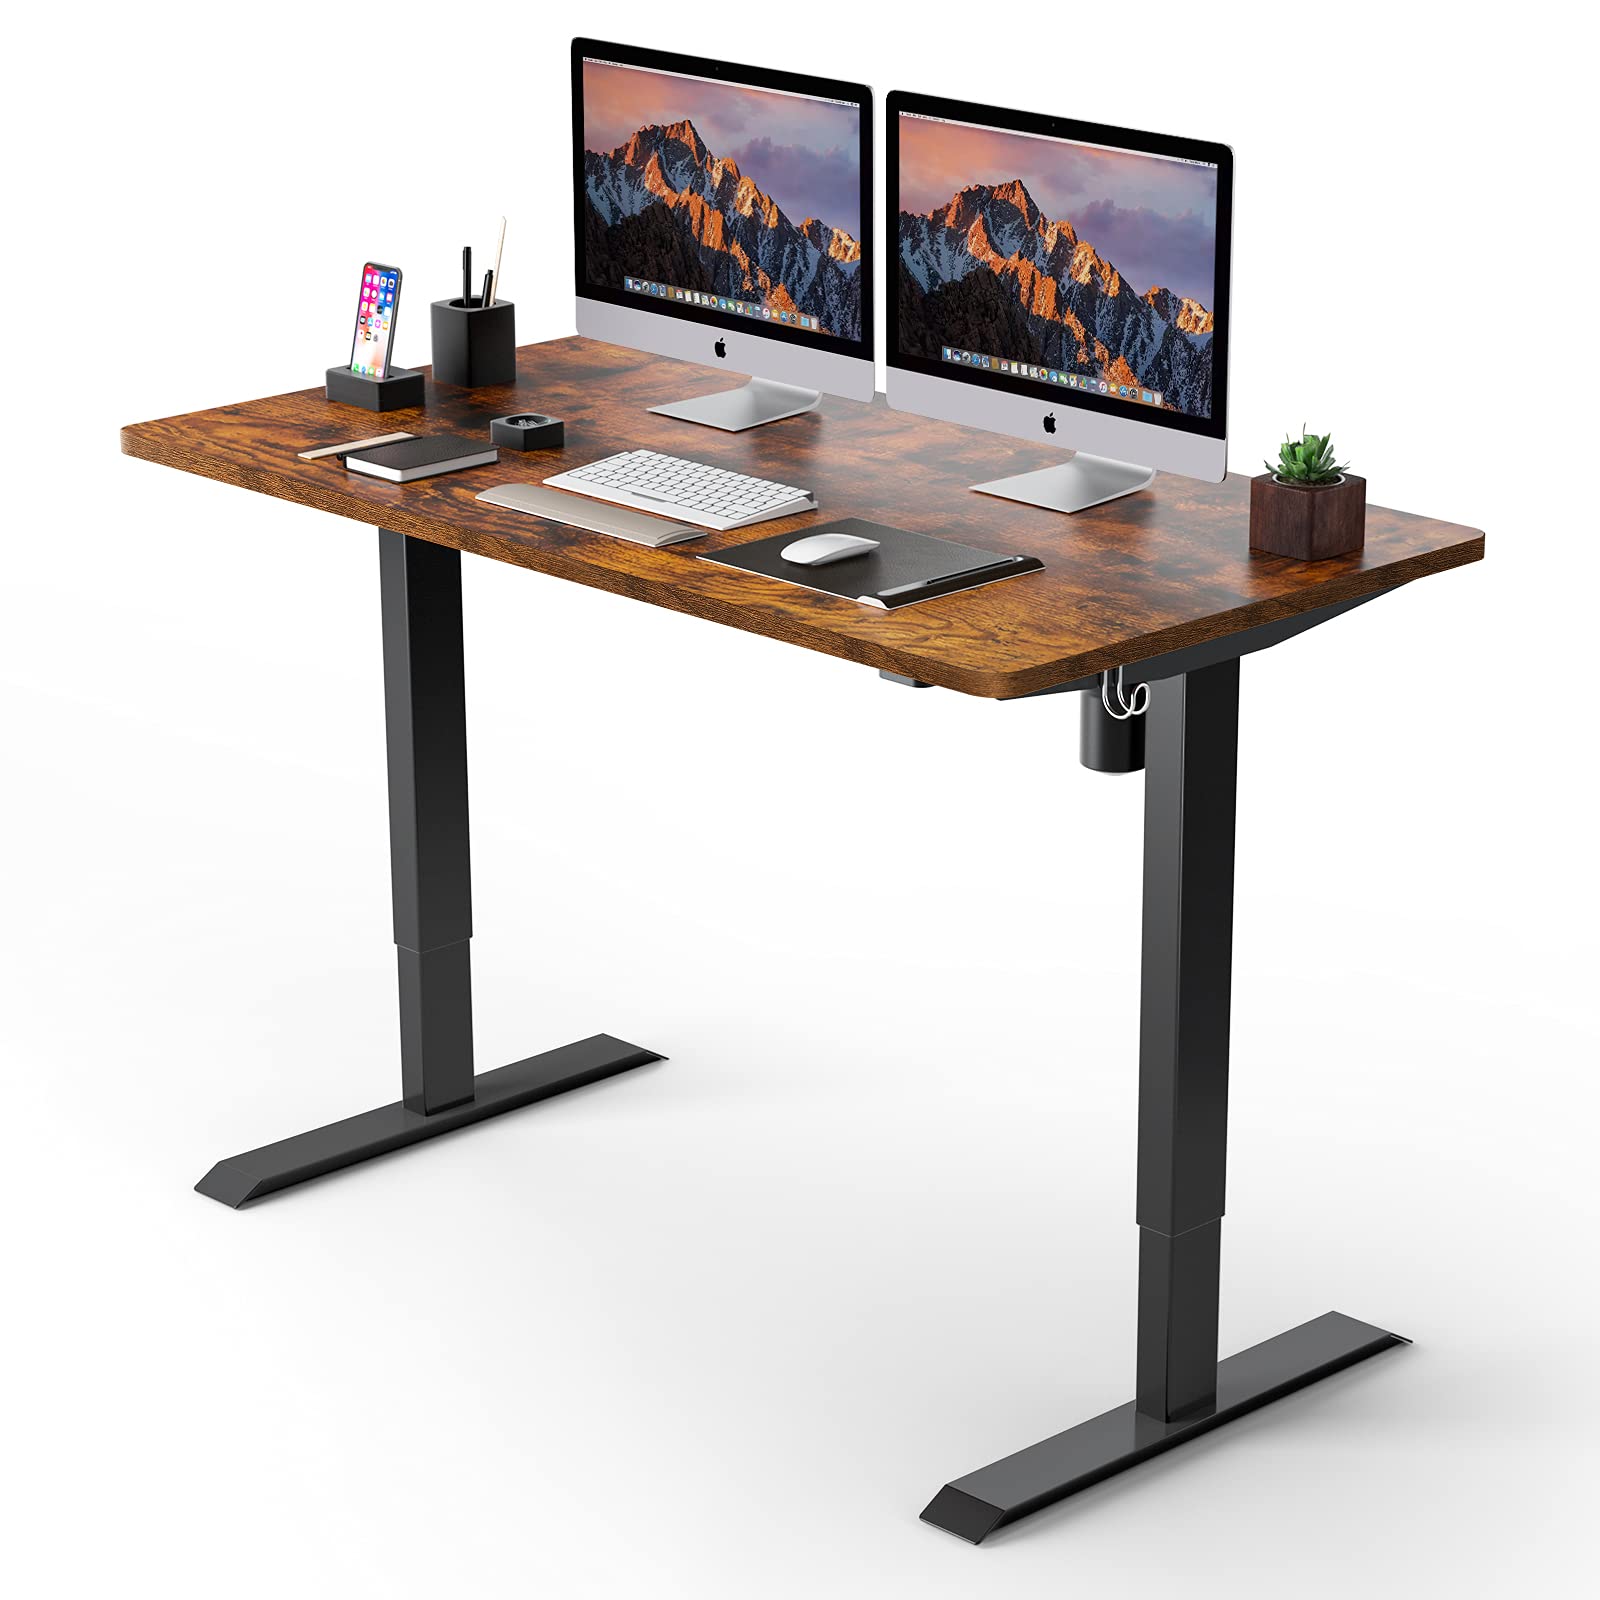 TTKK Electric Standing Desk, 48 x 24 inches Whole Piece Deskboard Adjustable Height Desk, Quick Assembly, Ultra-Quiet Motor, Standing Desk Brown To...